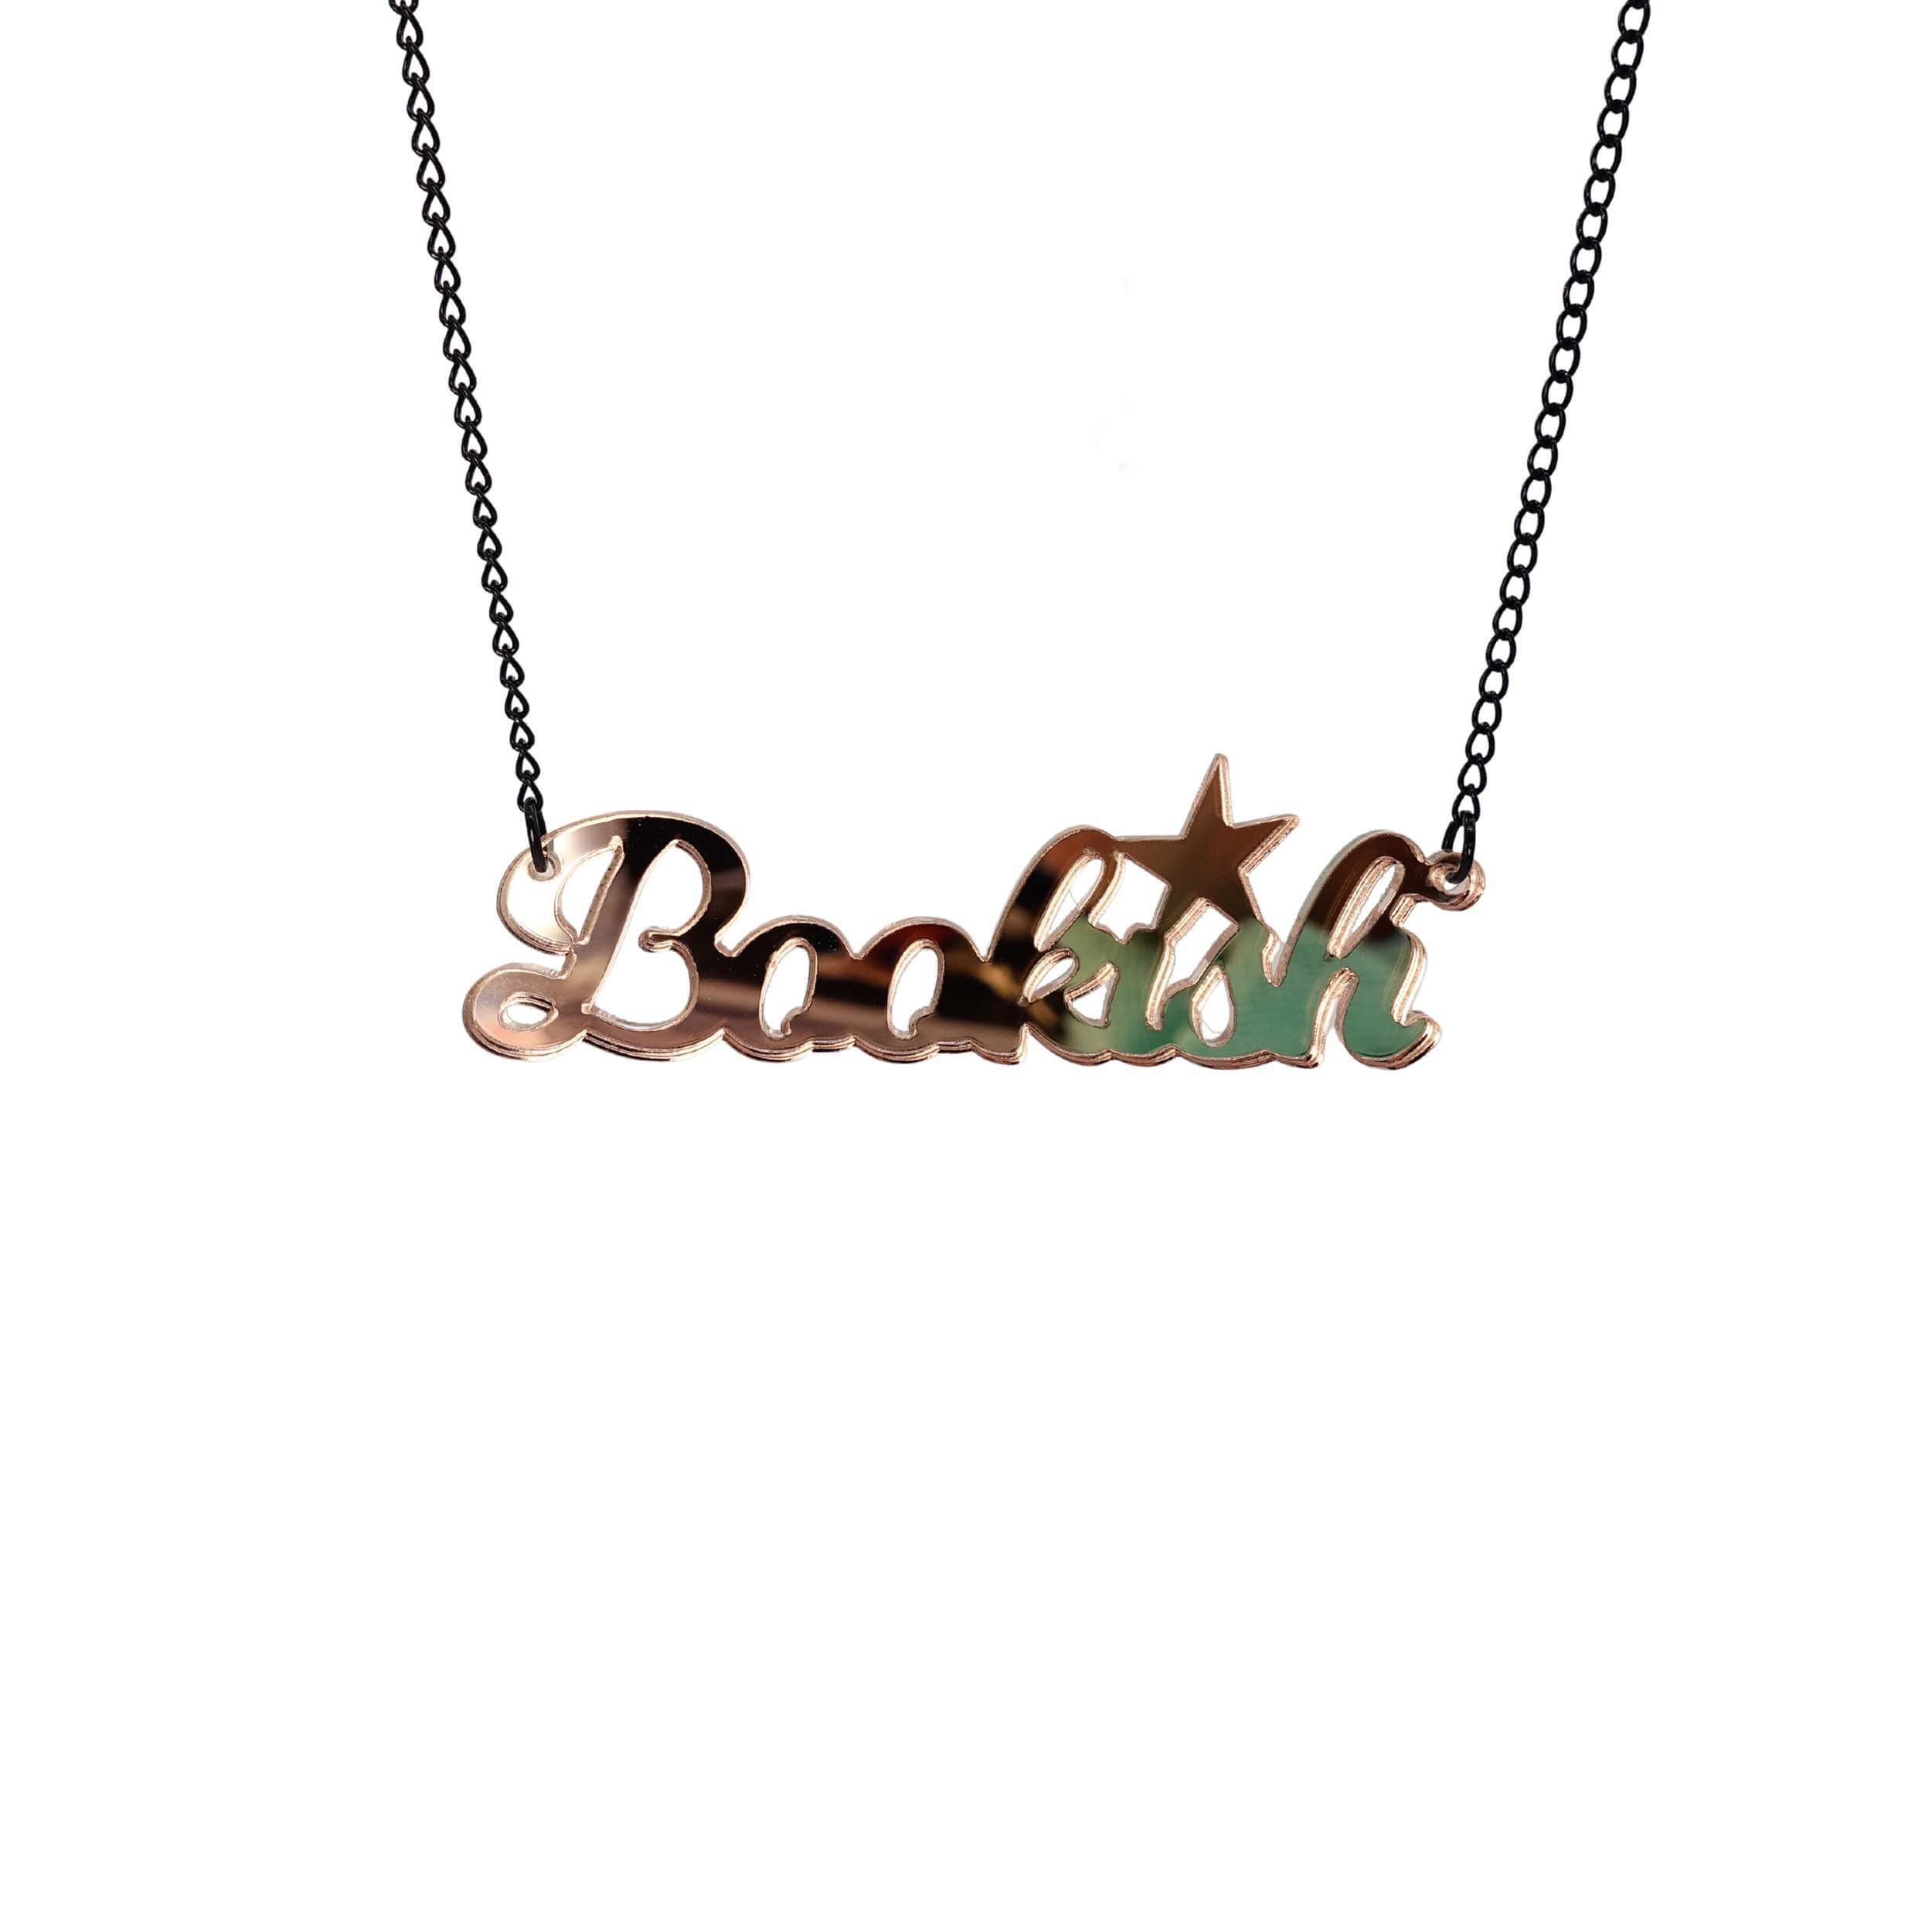 Rose gold mirror Bookish necklace shown against a white background. 